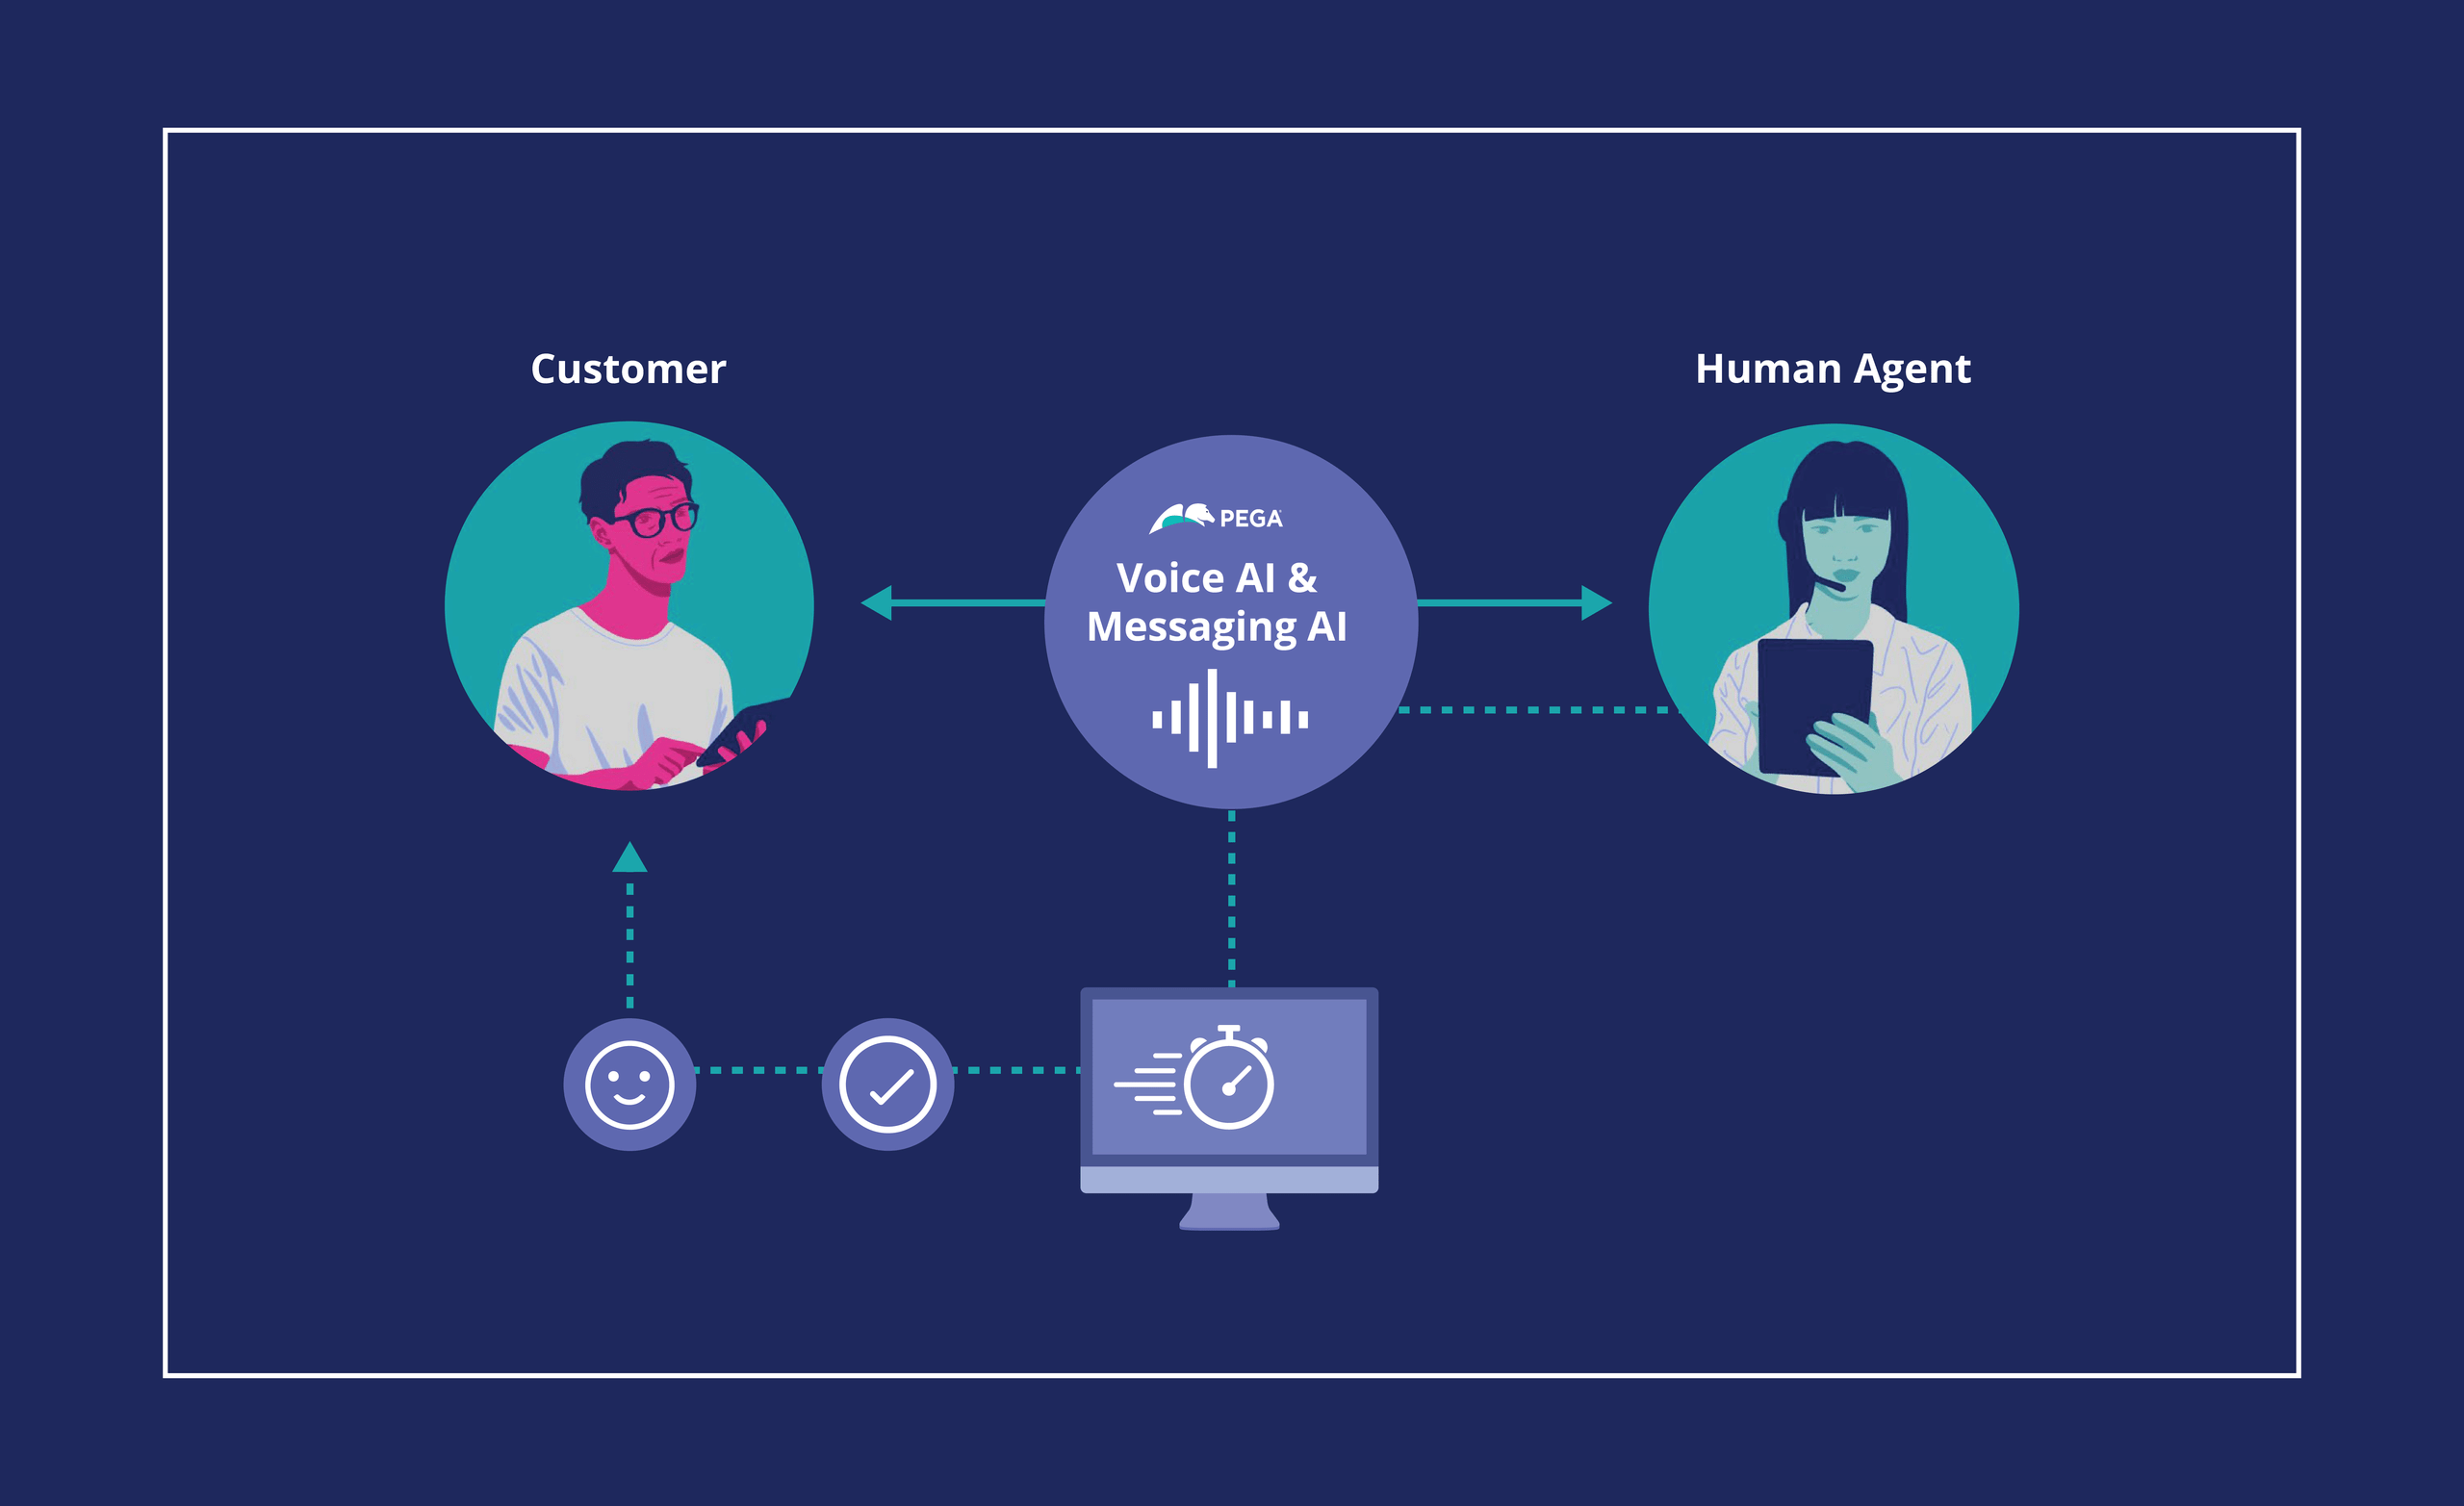 Voice AI and Messaging AI analyzes every conversation with real-time intelligence